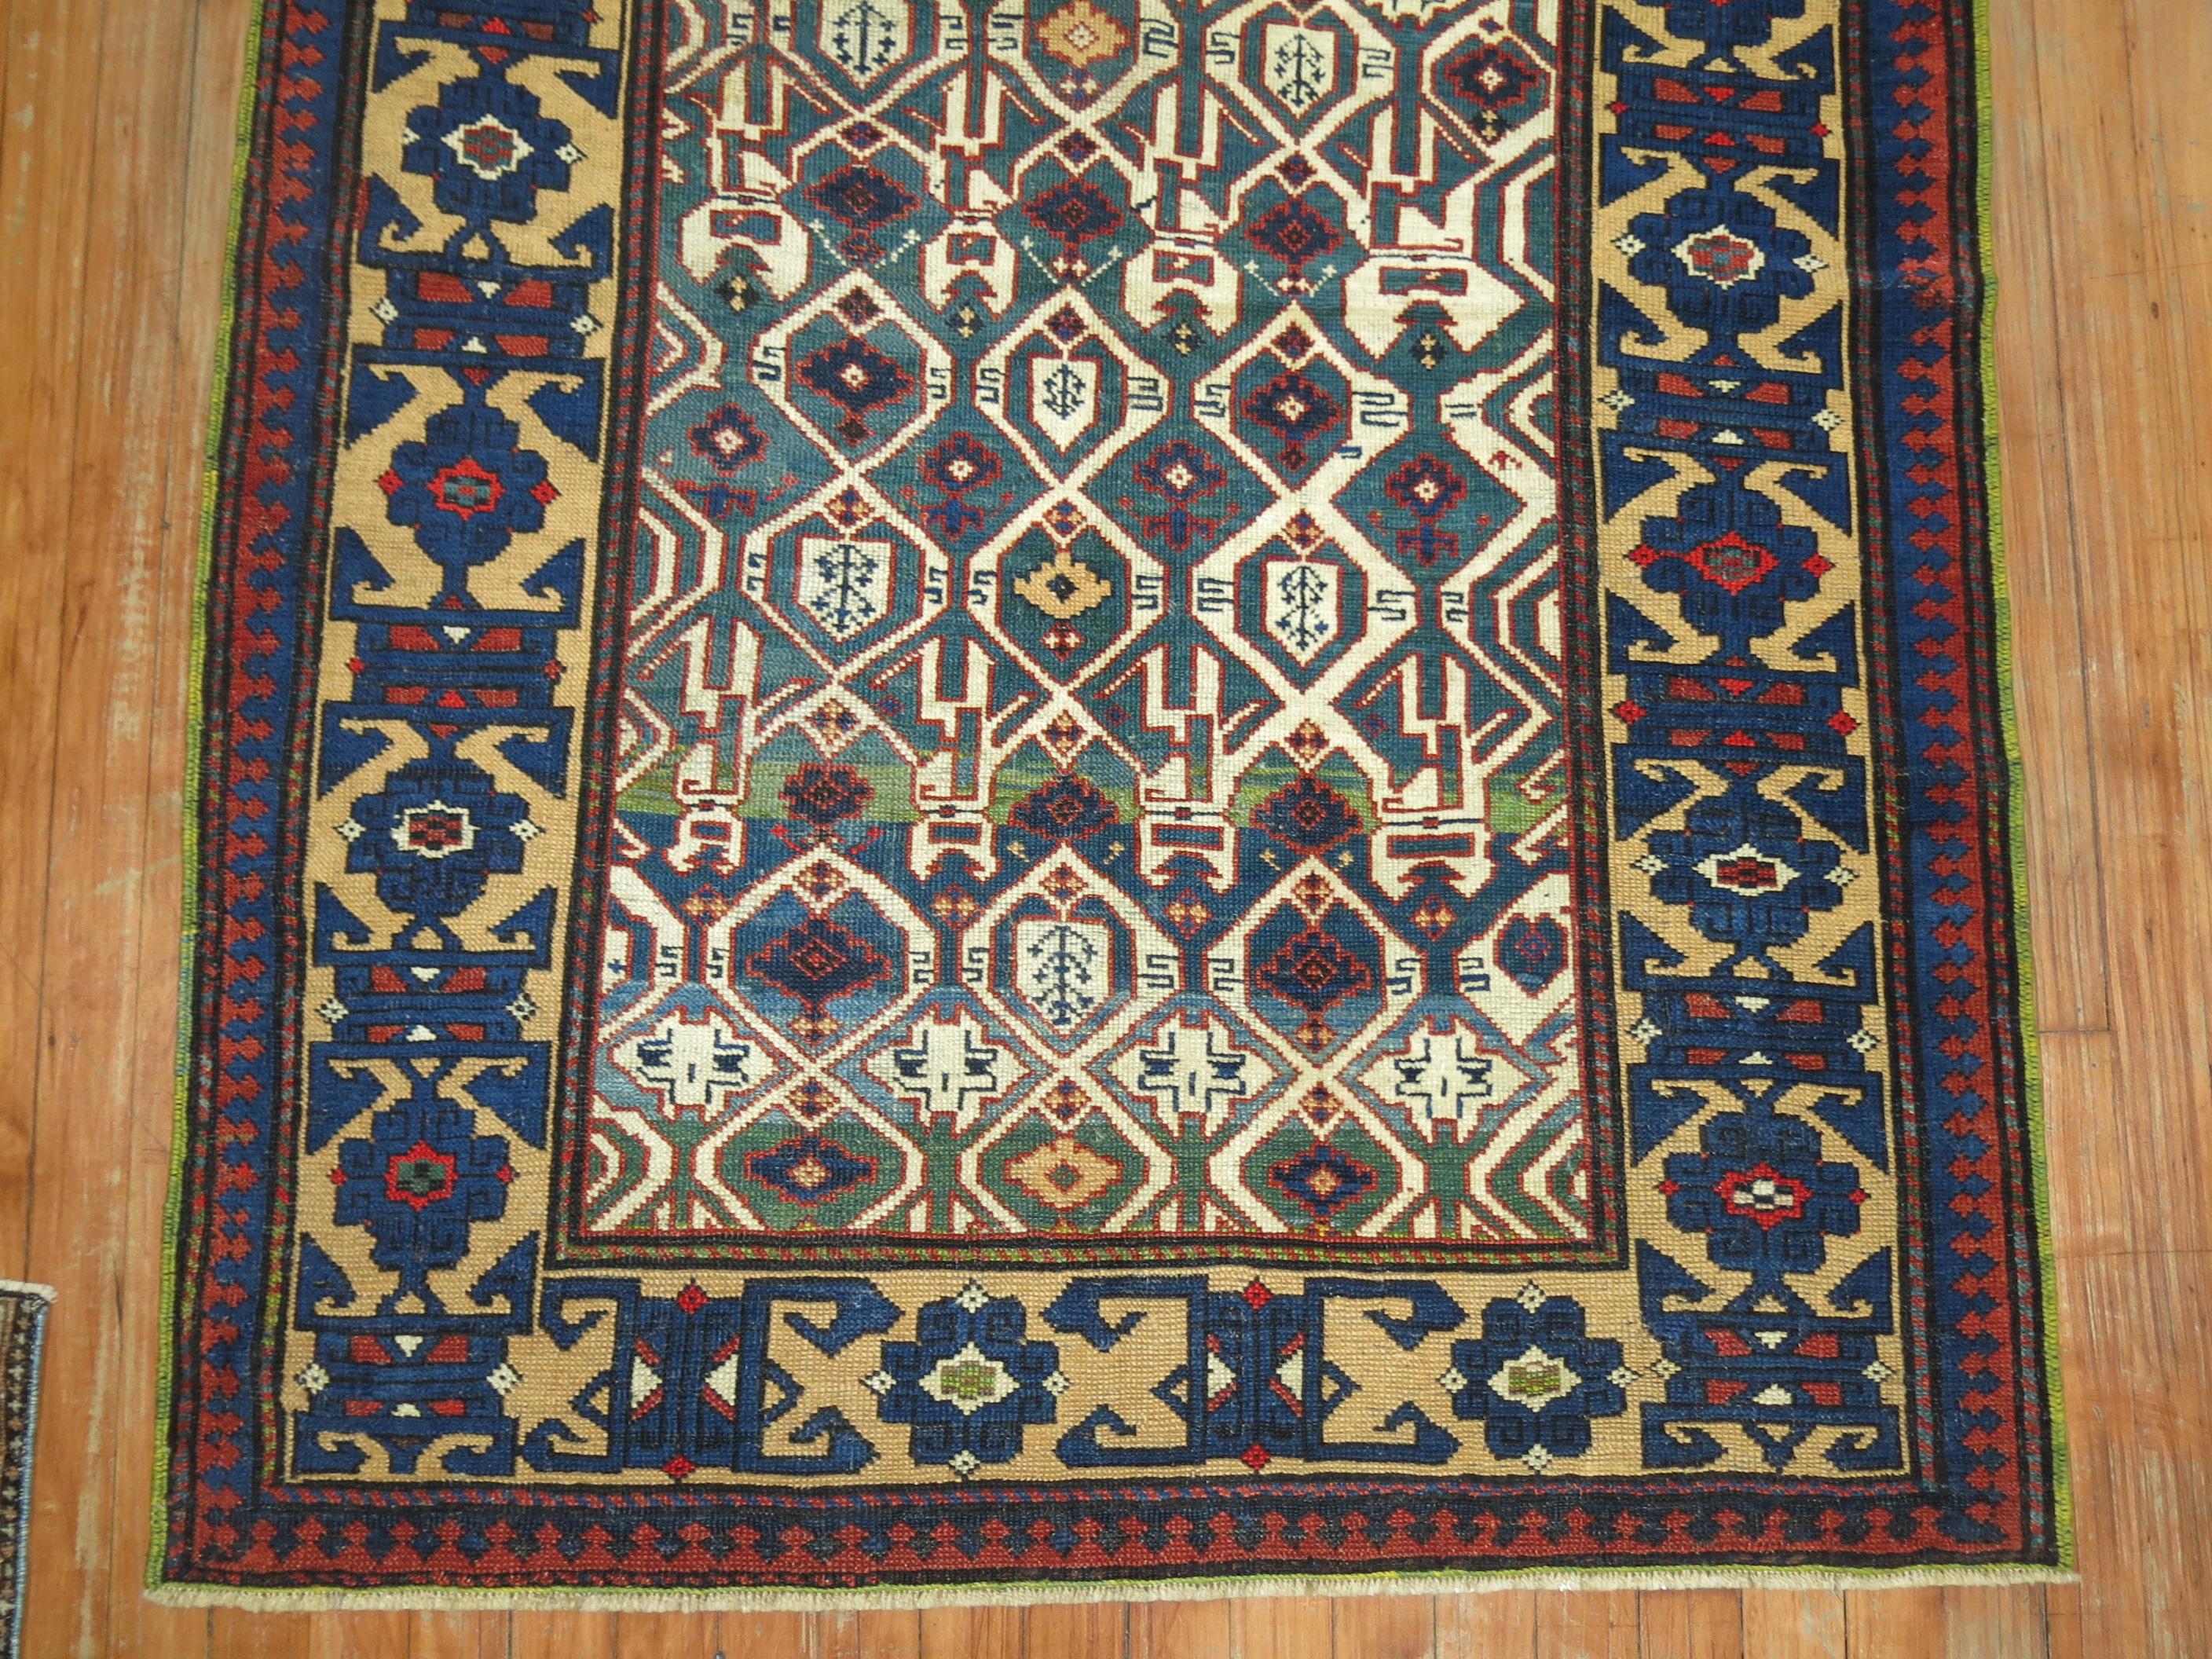 An early 20th century Caucasian Kuba rug with a geometric design in green and blue

Measures: 3'7